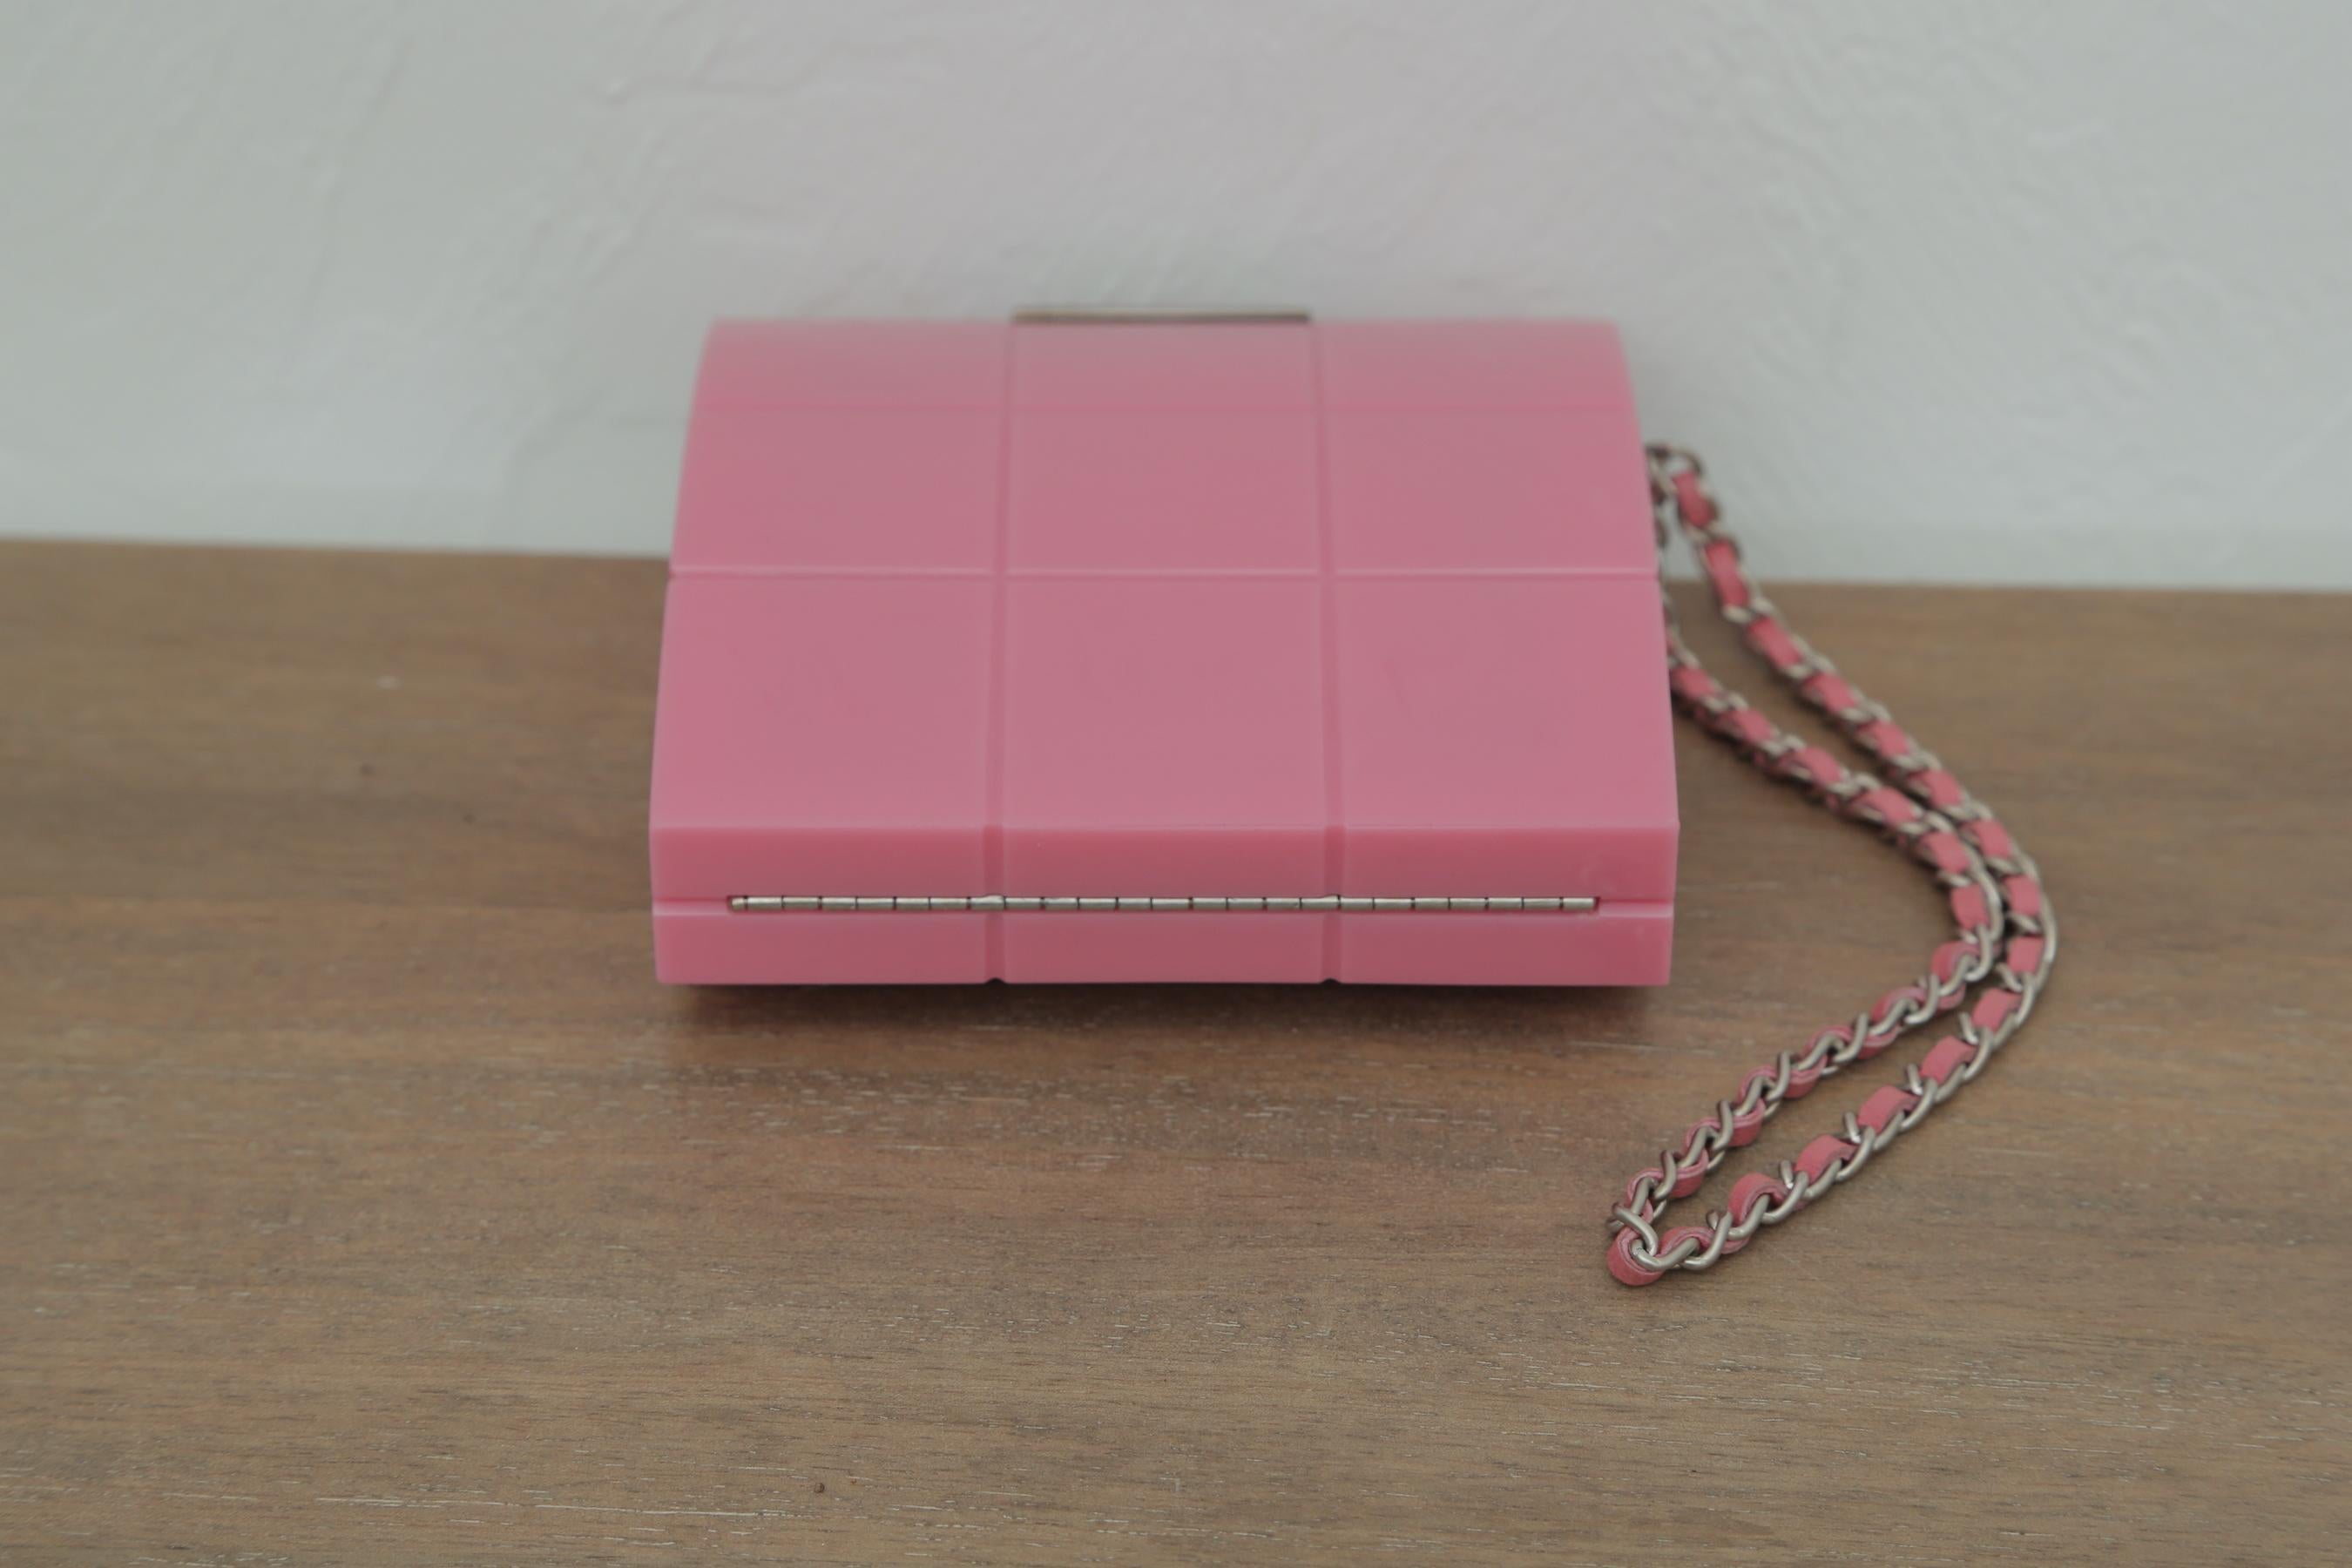  2002s Rare Chanel Perspex Lucite Minaudiere Pink Plastic Clutch In Excellent Condition For Sale In West palm beach, FL